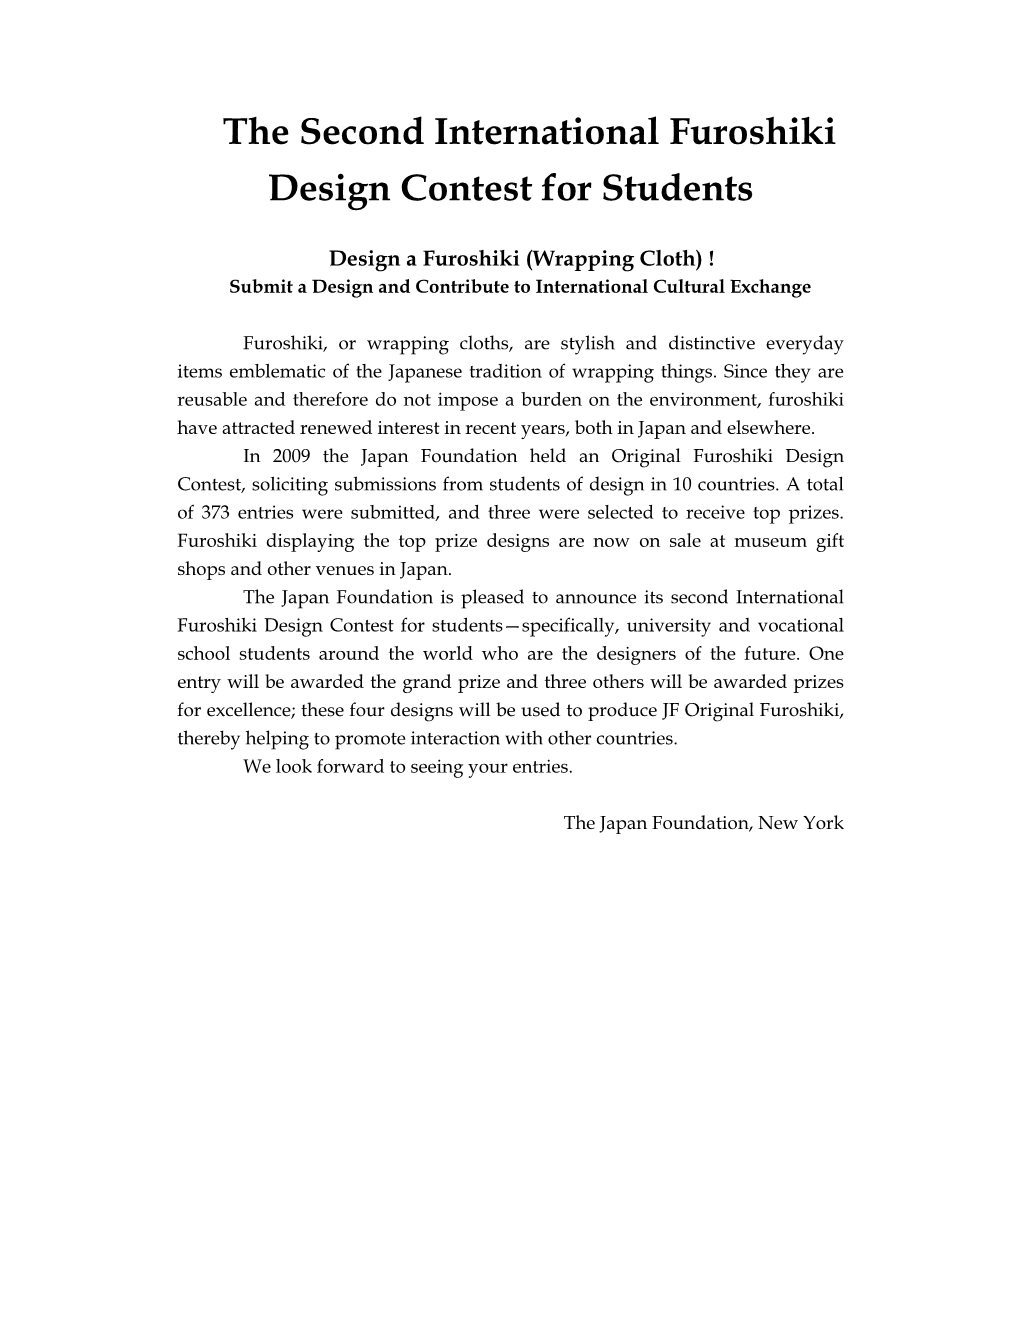 The Second International Furoshiki Design Contest for Students